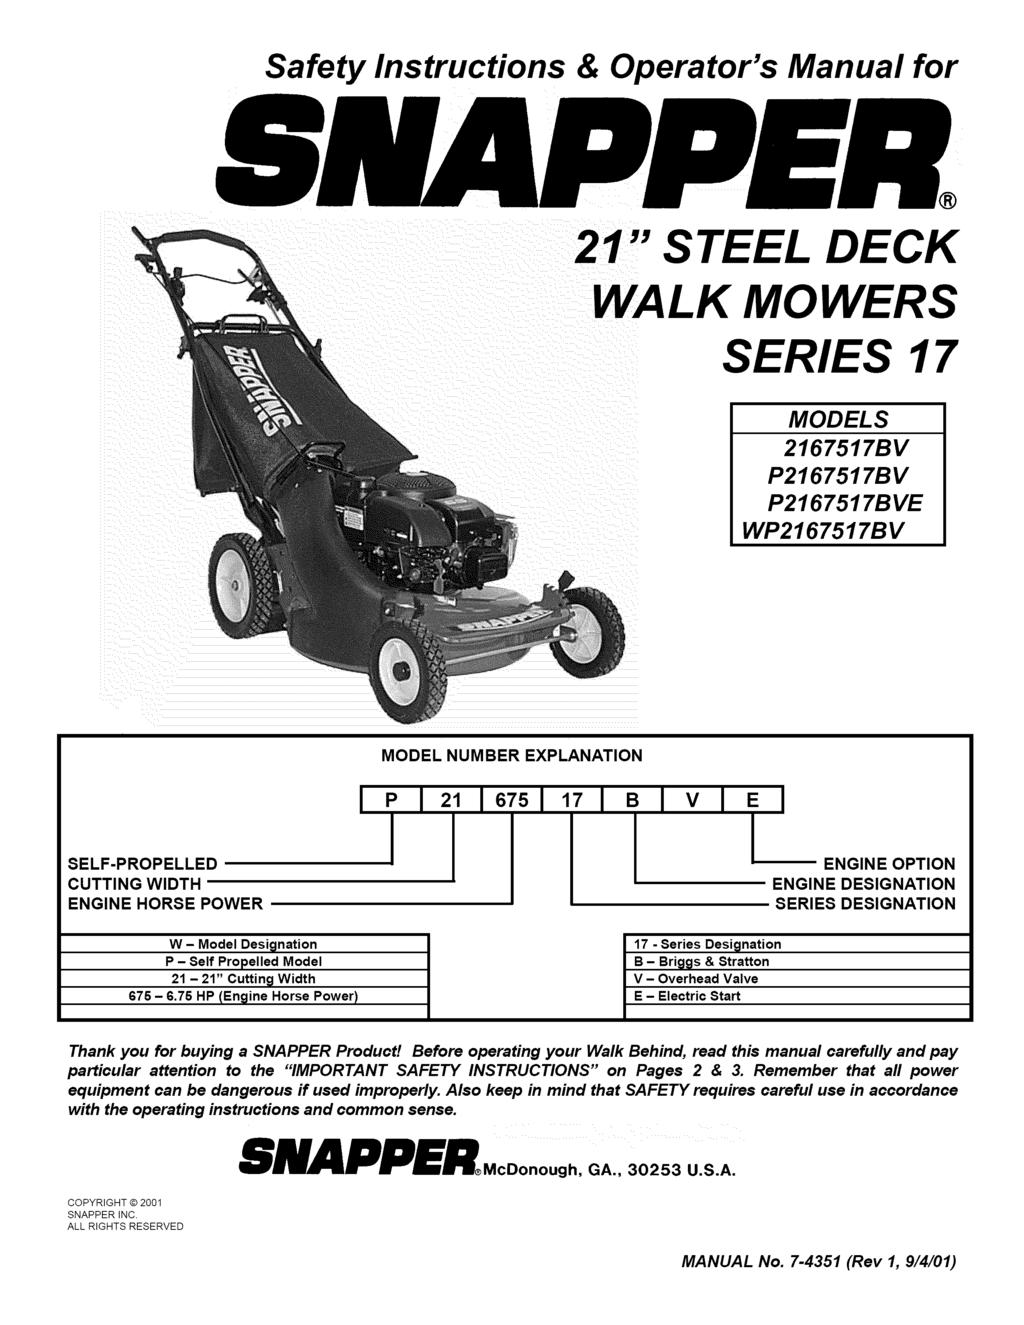 Safety Instructions & Operator's Manual for 21" STEEL DECK WALK MOWERS SERIES 17 MODELS 2167517BV P2167517BV P2167517BVE WP2167517BV MODEL NUMBER EXPLANATION SELF-PROPELLED CUTTING WIDTH ENGINE HORSE